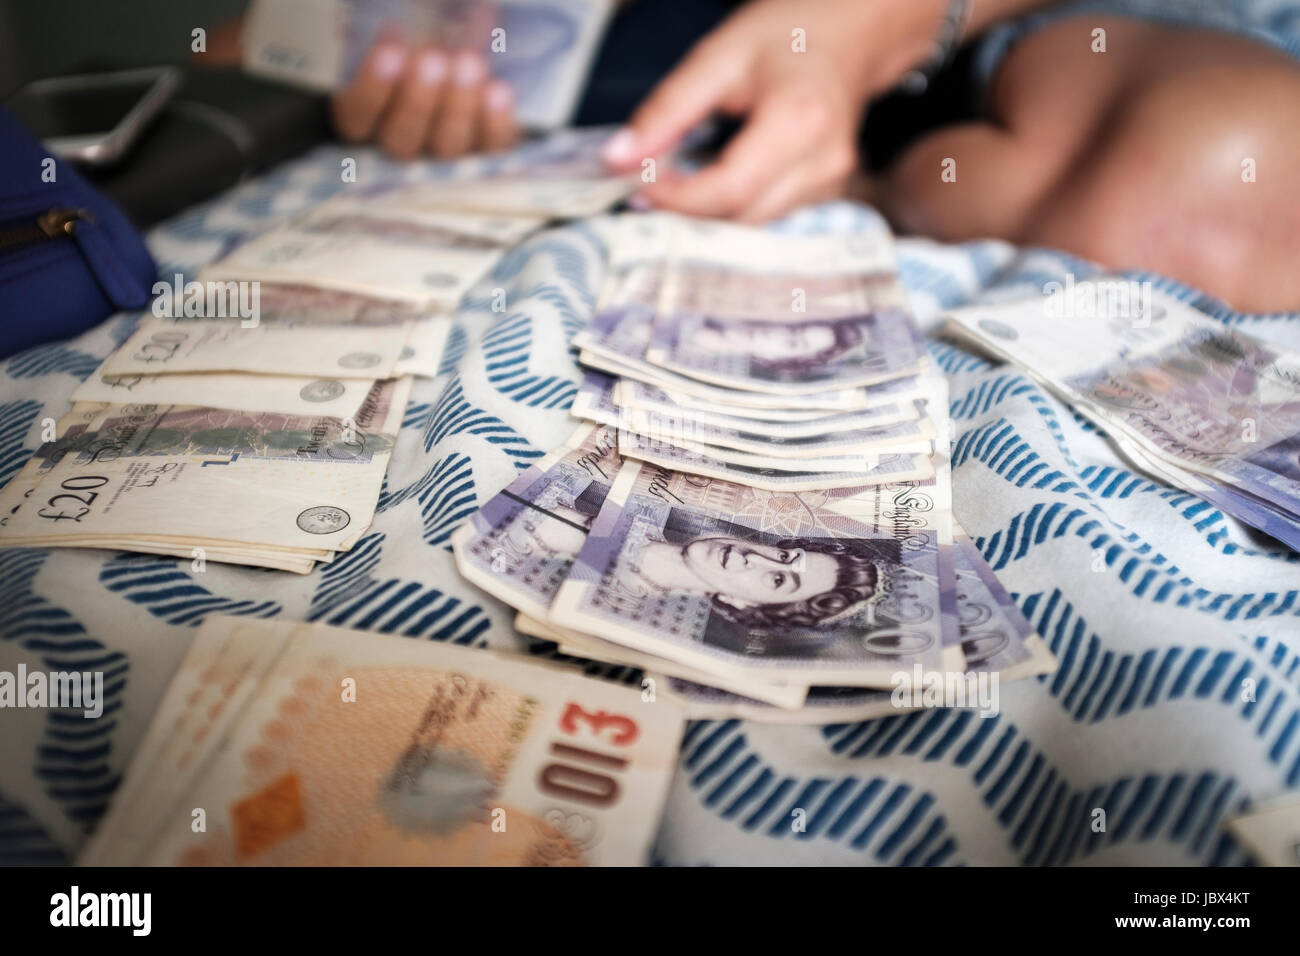 Counting money-UK pound sterling Stock Photo